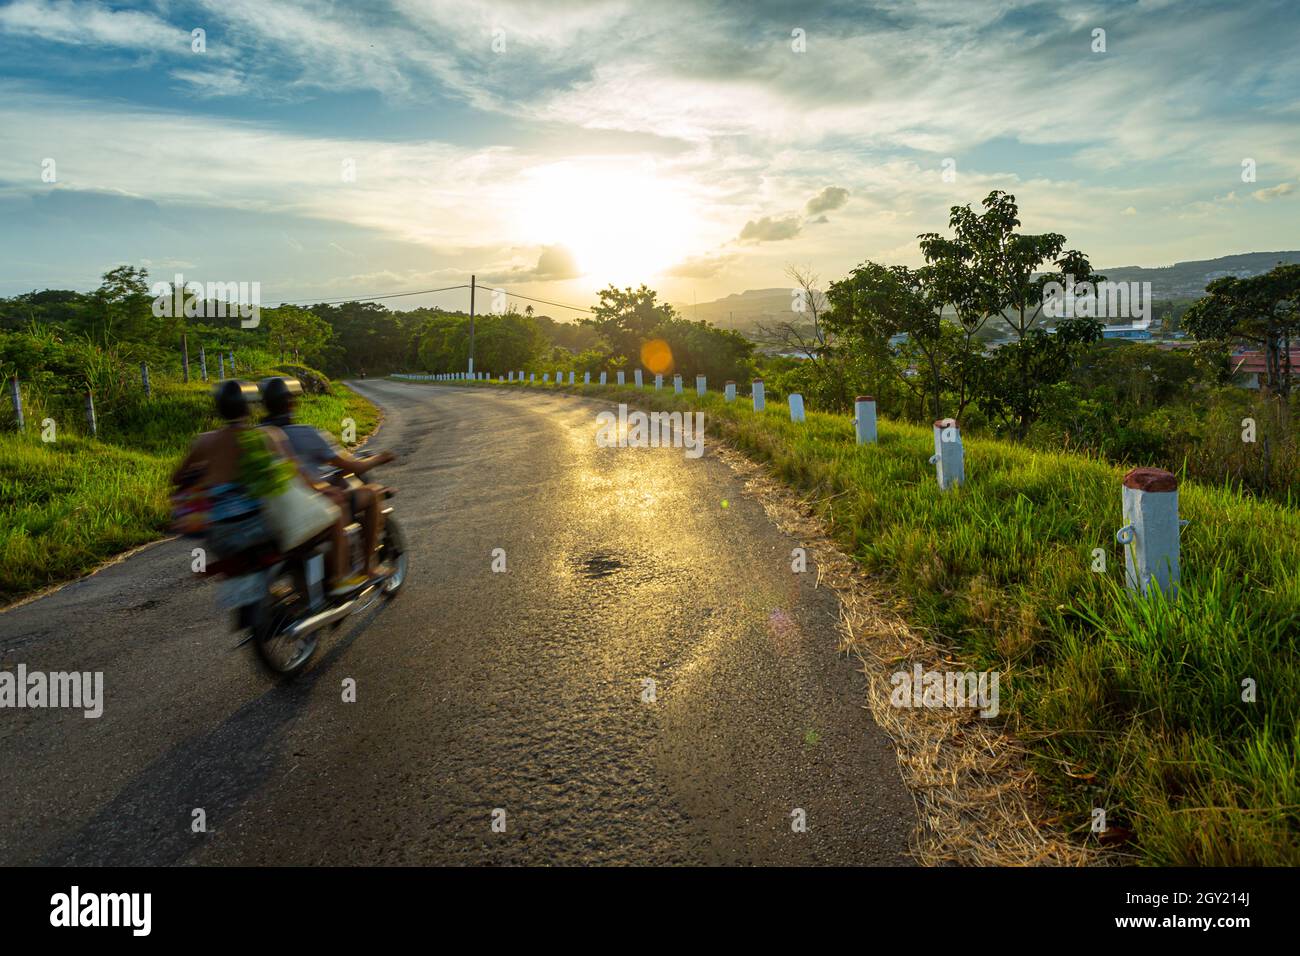 This is a couple traveling in a motocycle at the sunset in a lonely road at the counry side. The golden rays of the sun are reflected in the alphalt w Stock Photo